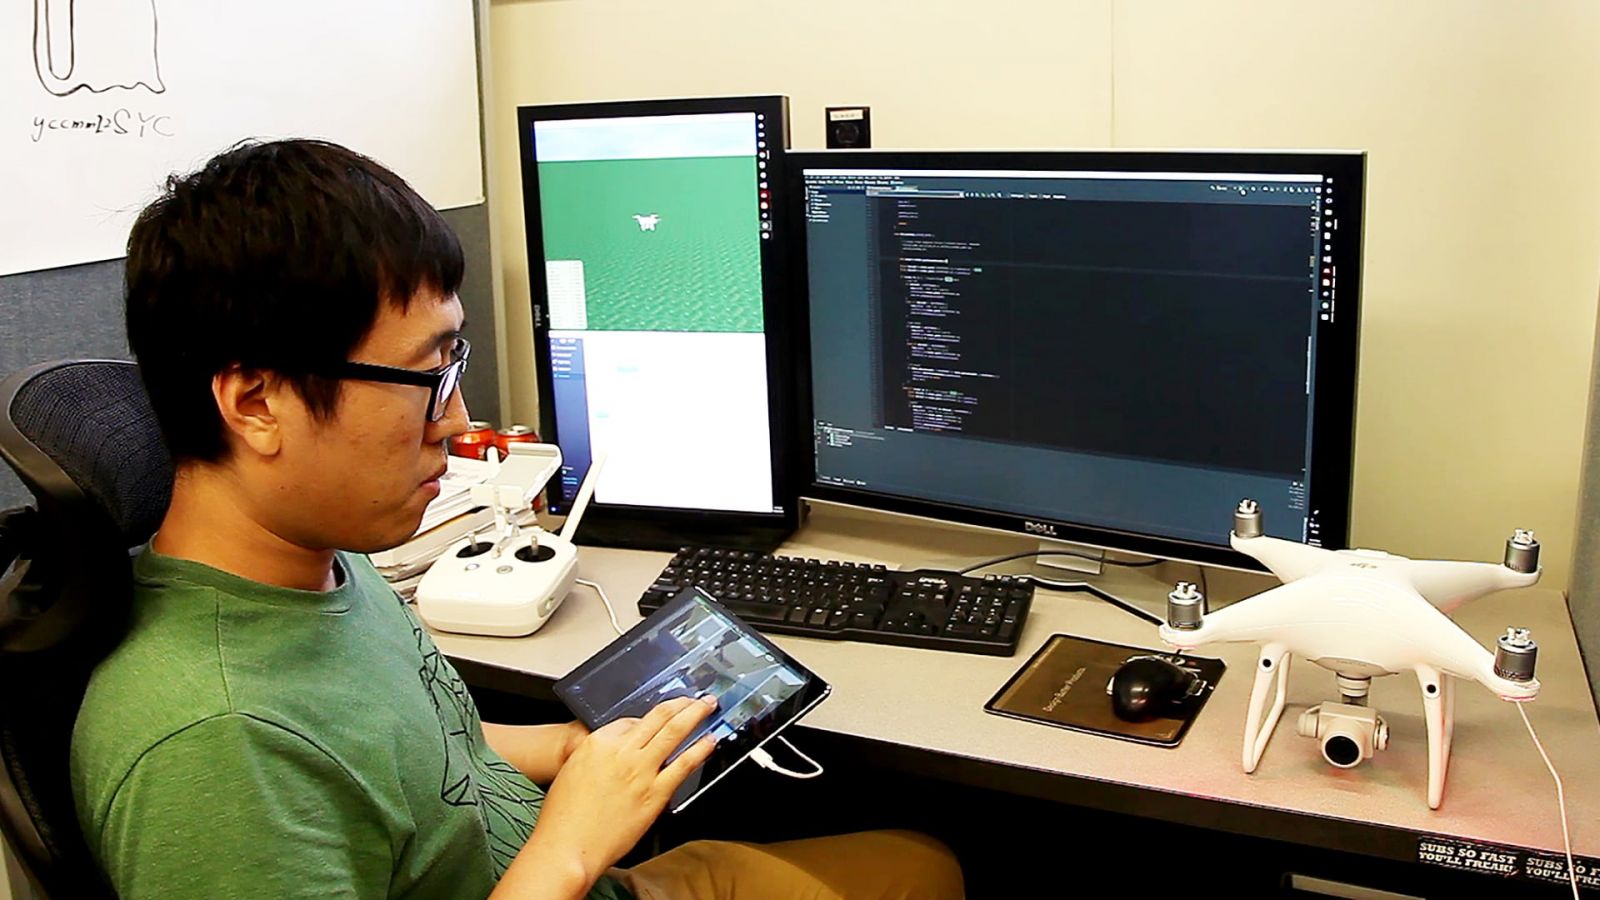 Hao Kang, doctoral student and co-investigator for FlyCam, works on the touch-screen navigation system. (Purdue University photo/High Performance Computer Graphics Lab)